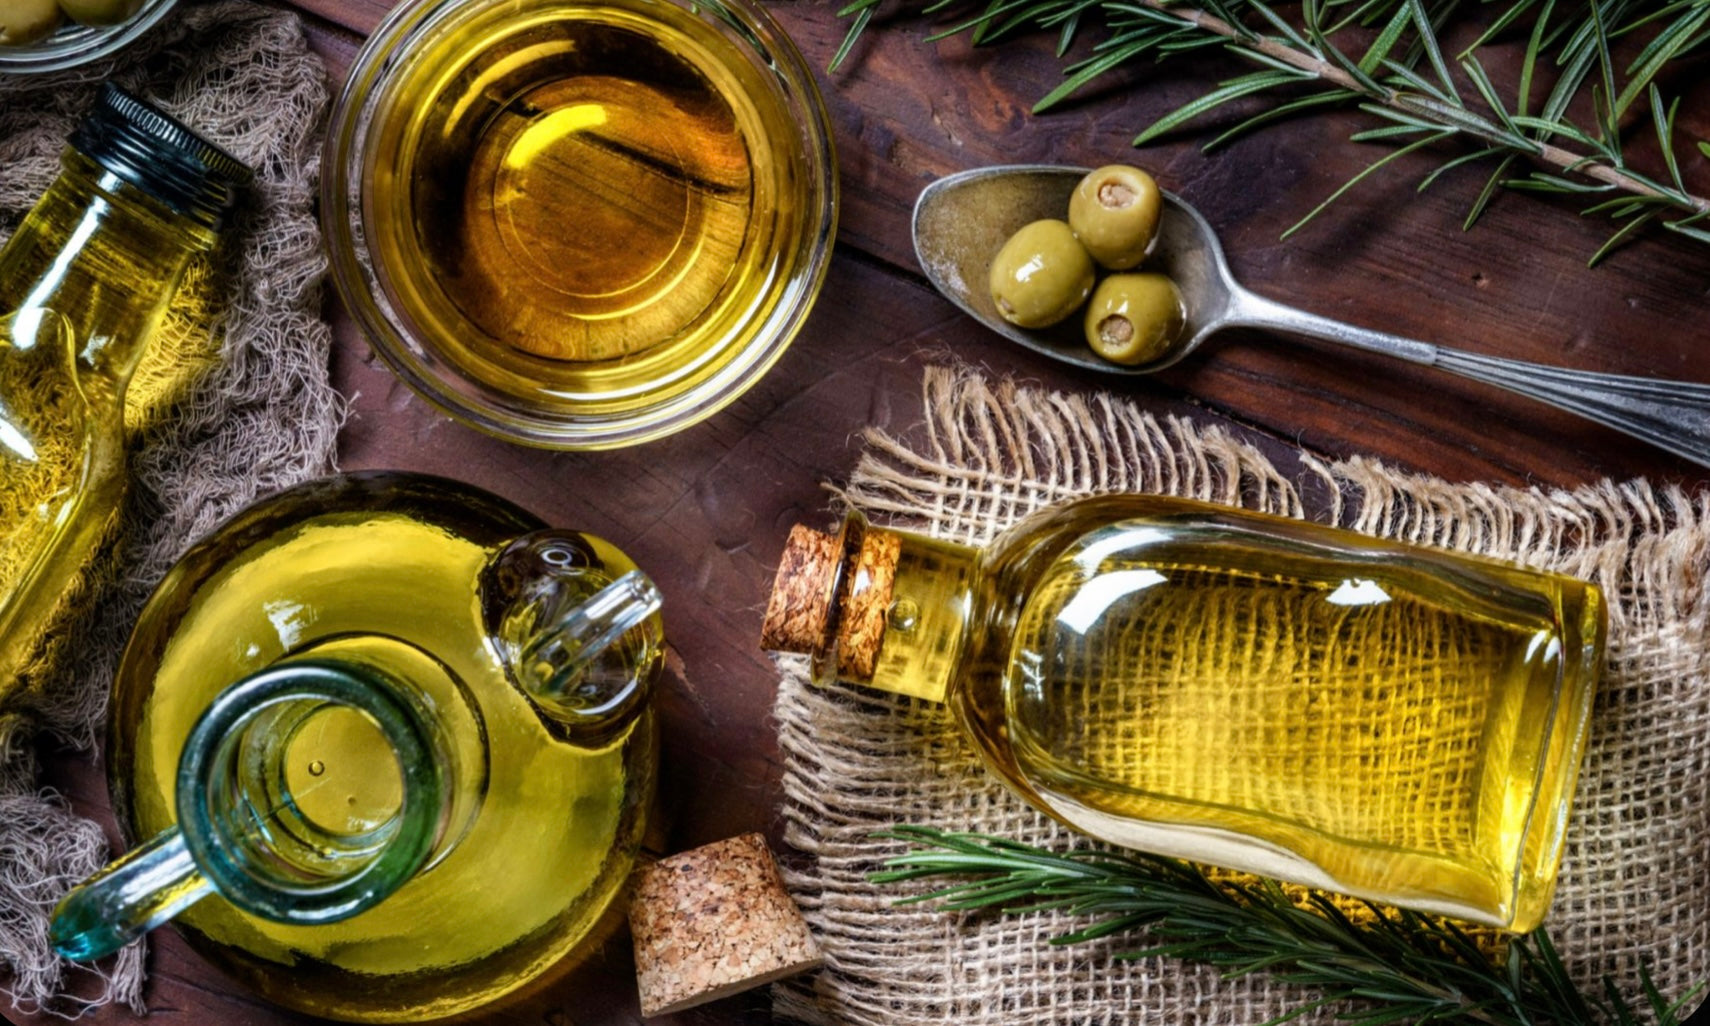 What does olive oil taste like? And the extra virgin?